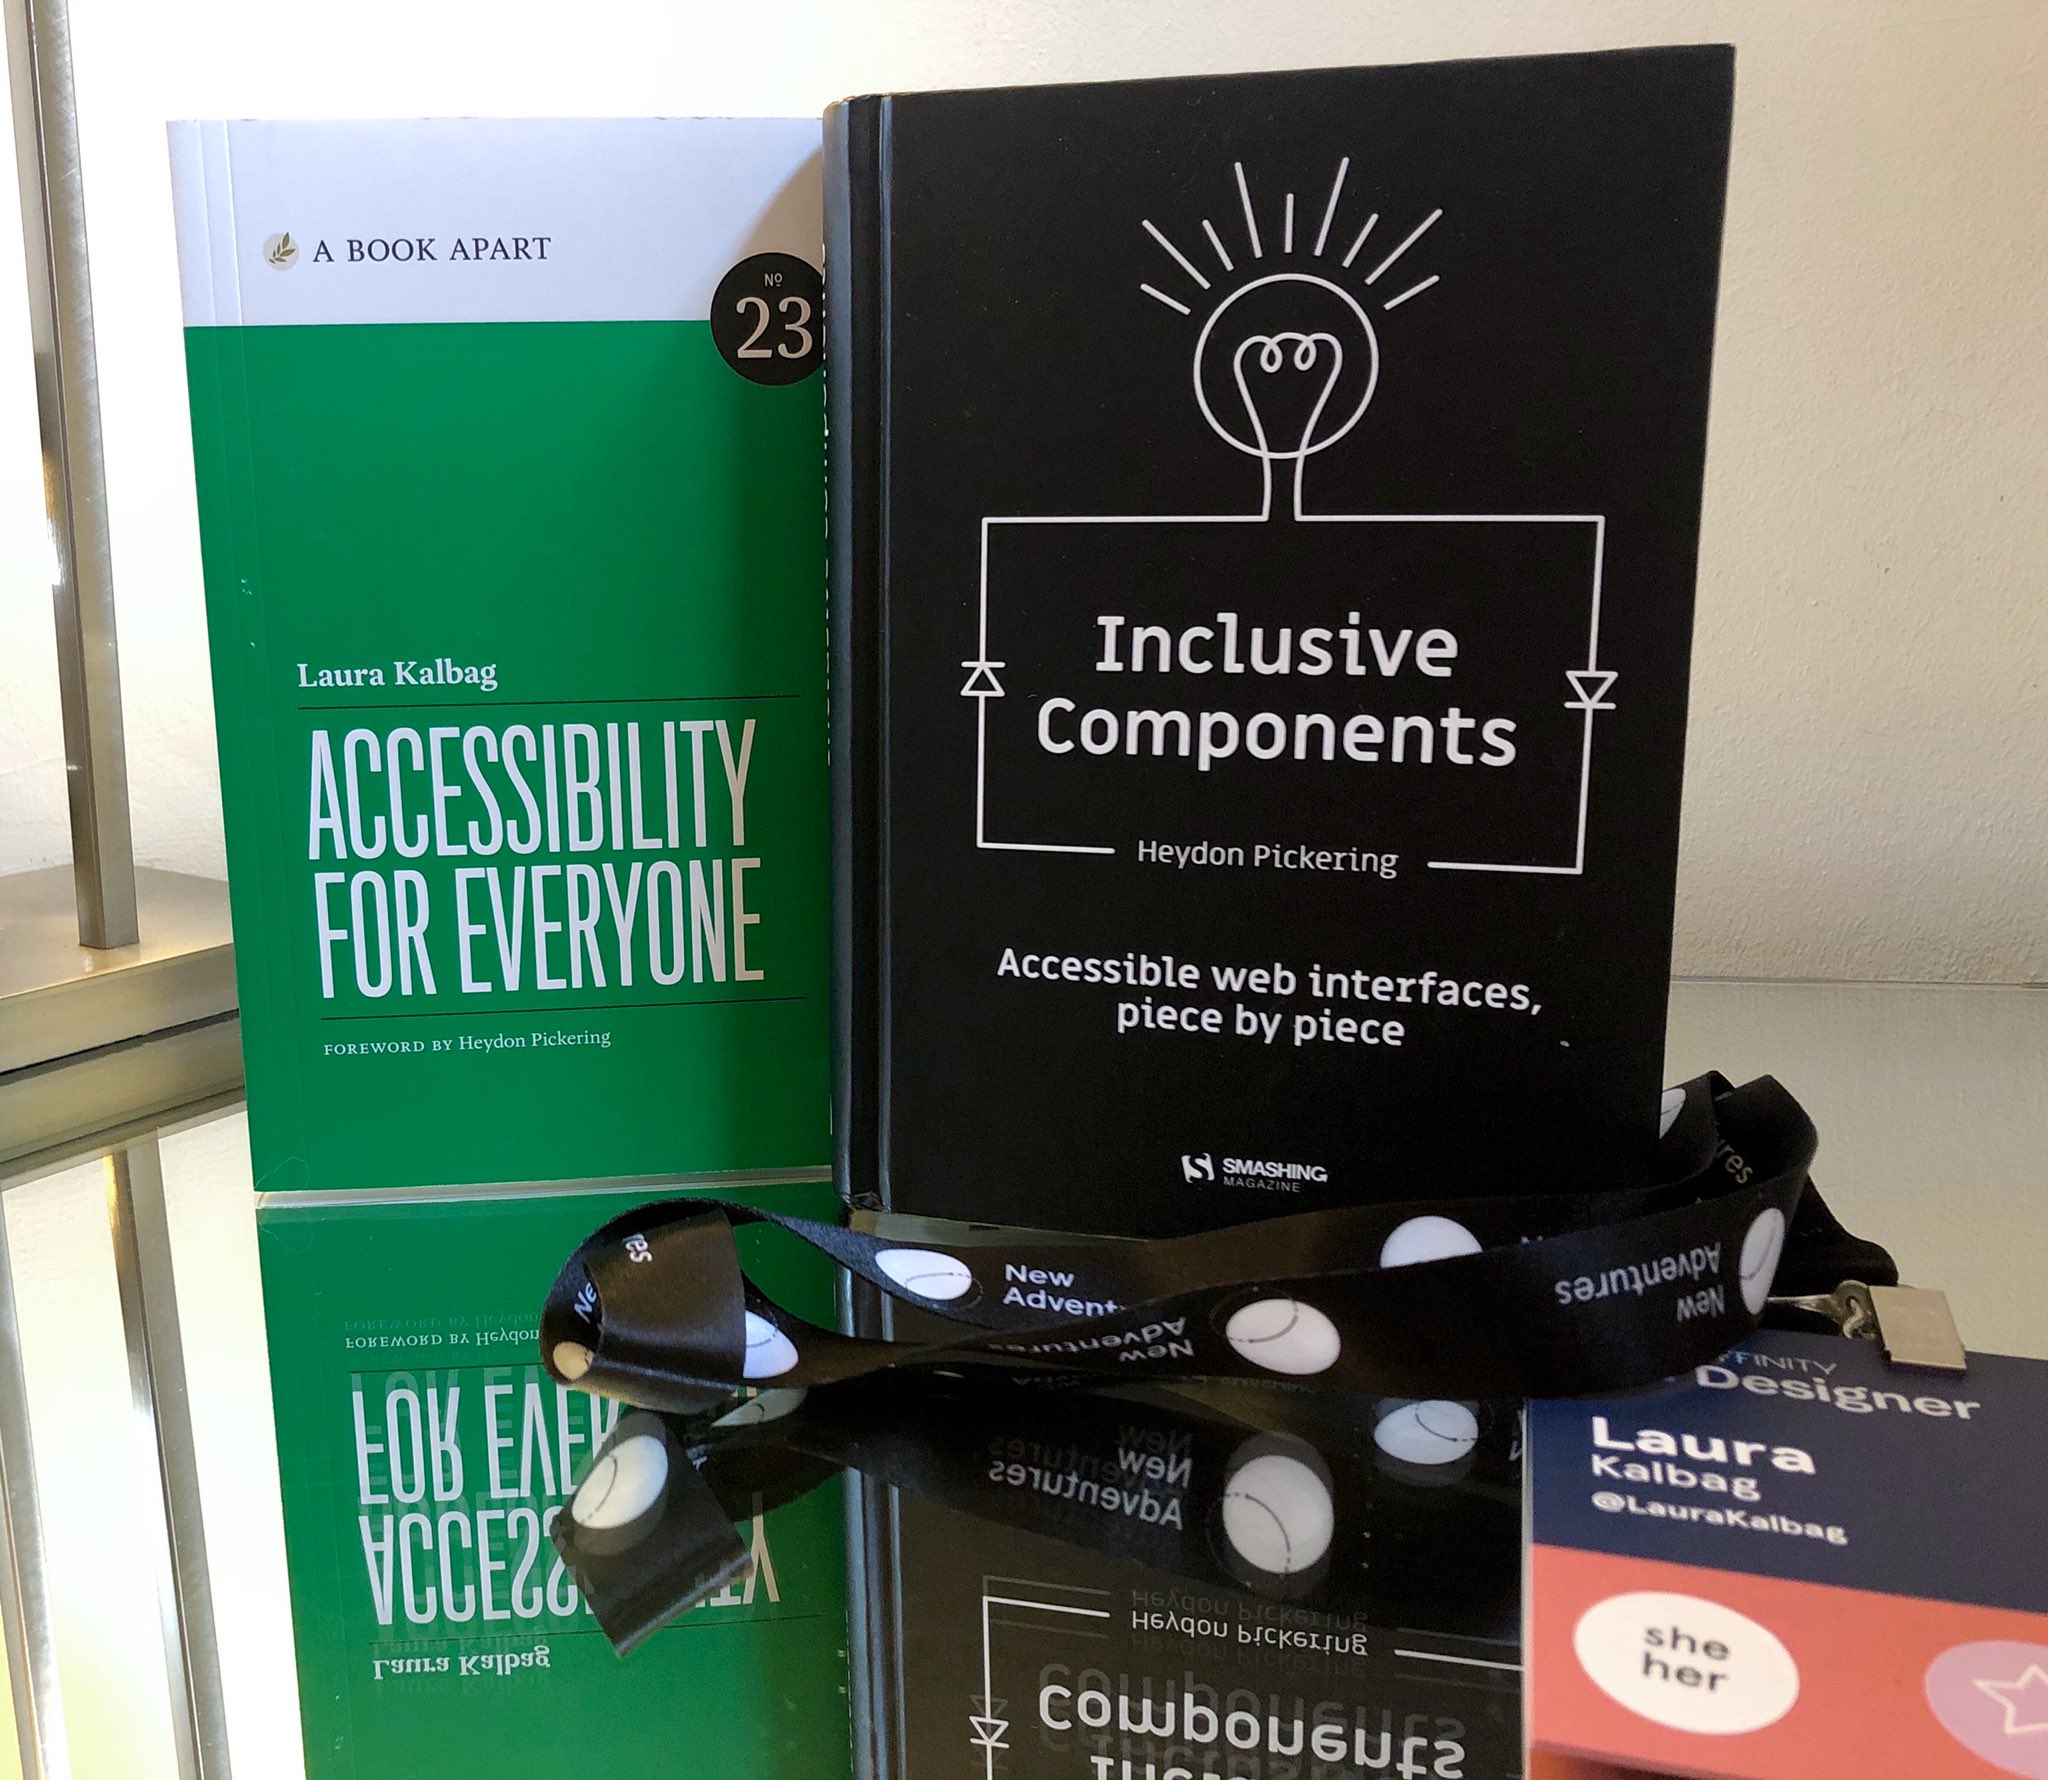 Accessibility For Everyone book by Laura Kalbag, Inclusive Components book by Heydon Pickering and my New Adventures lanyard.